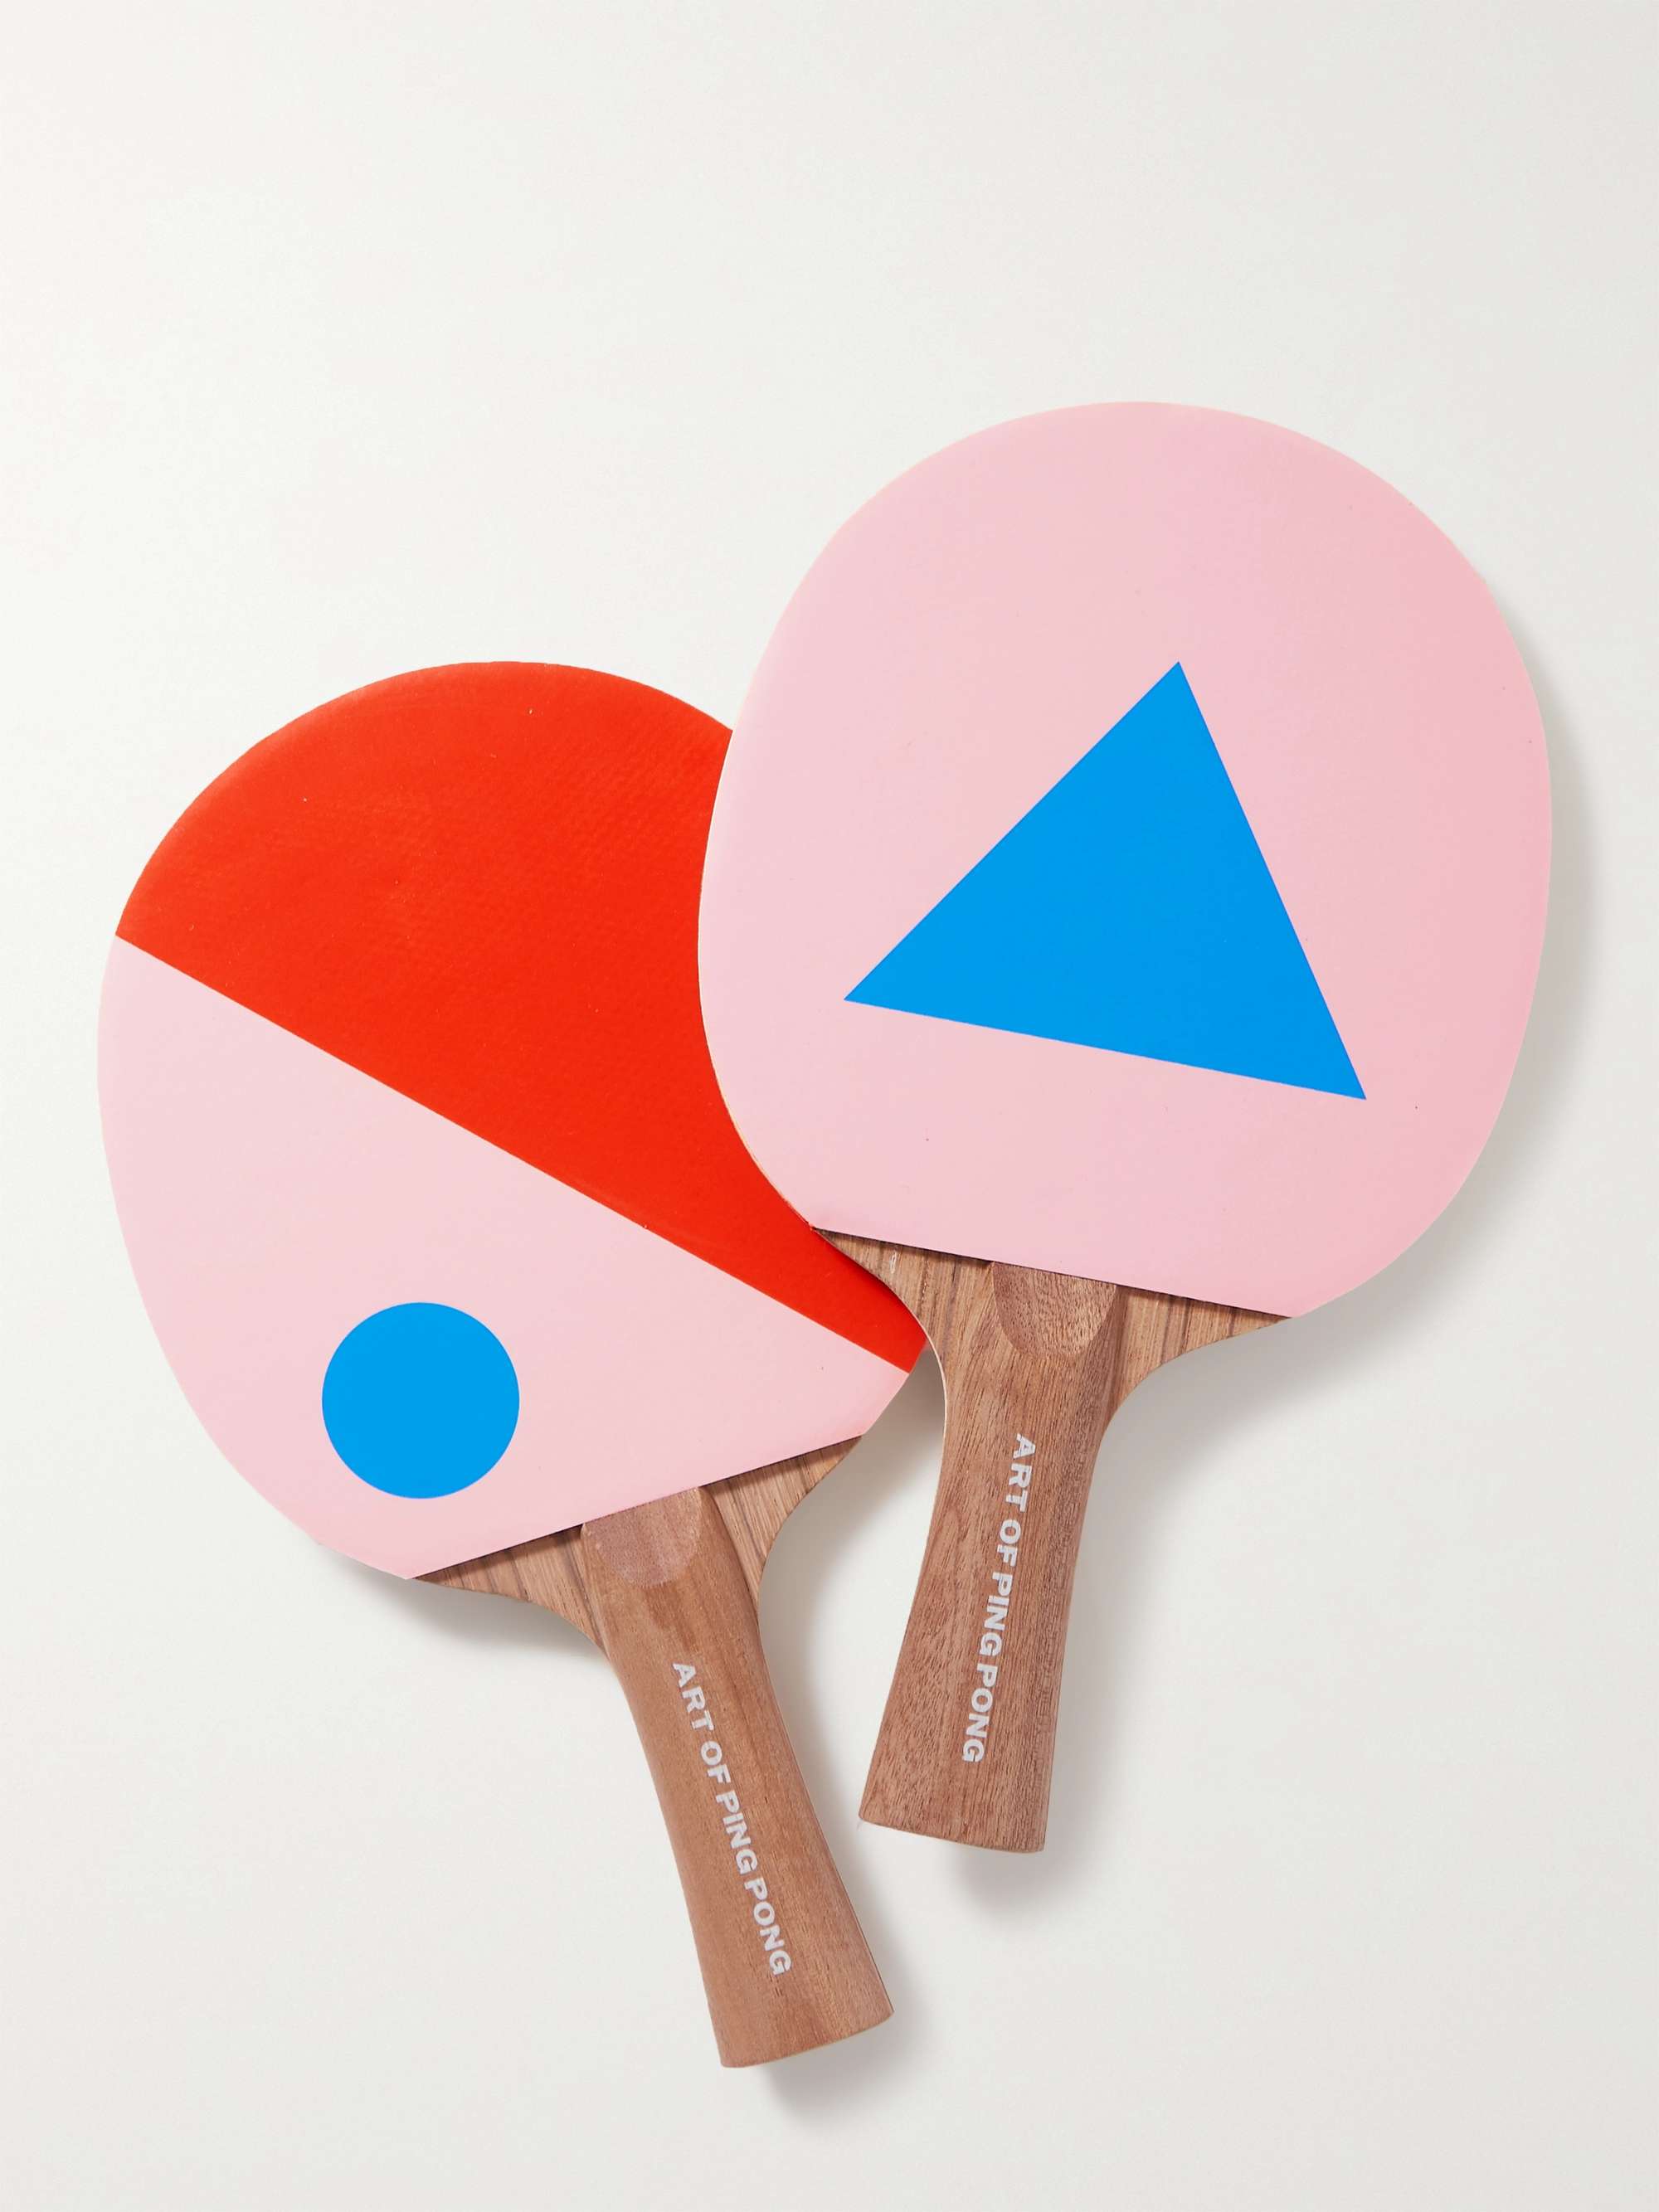 THE ART OF PING PONG Set of Two Ping Pong Bats